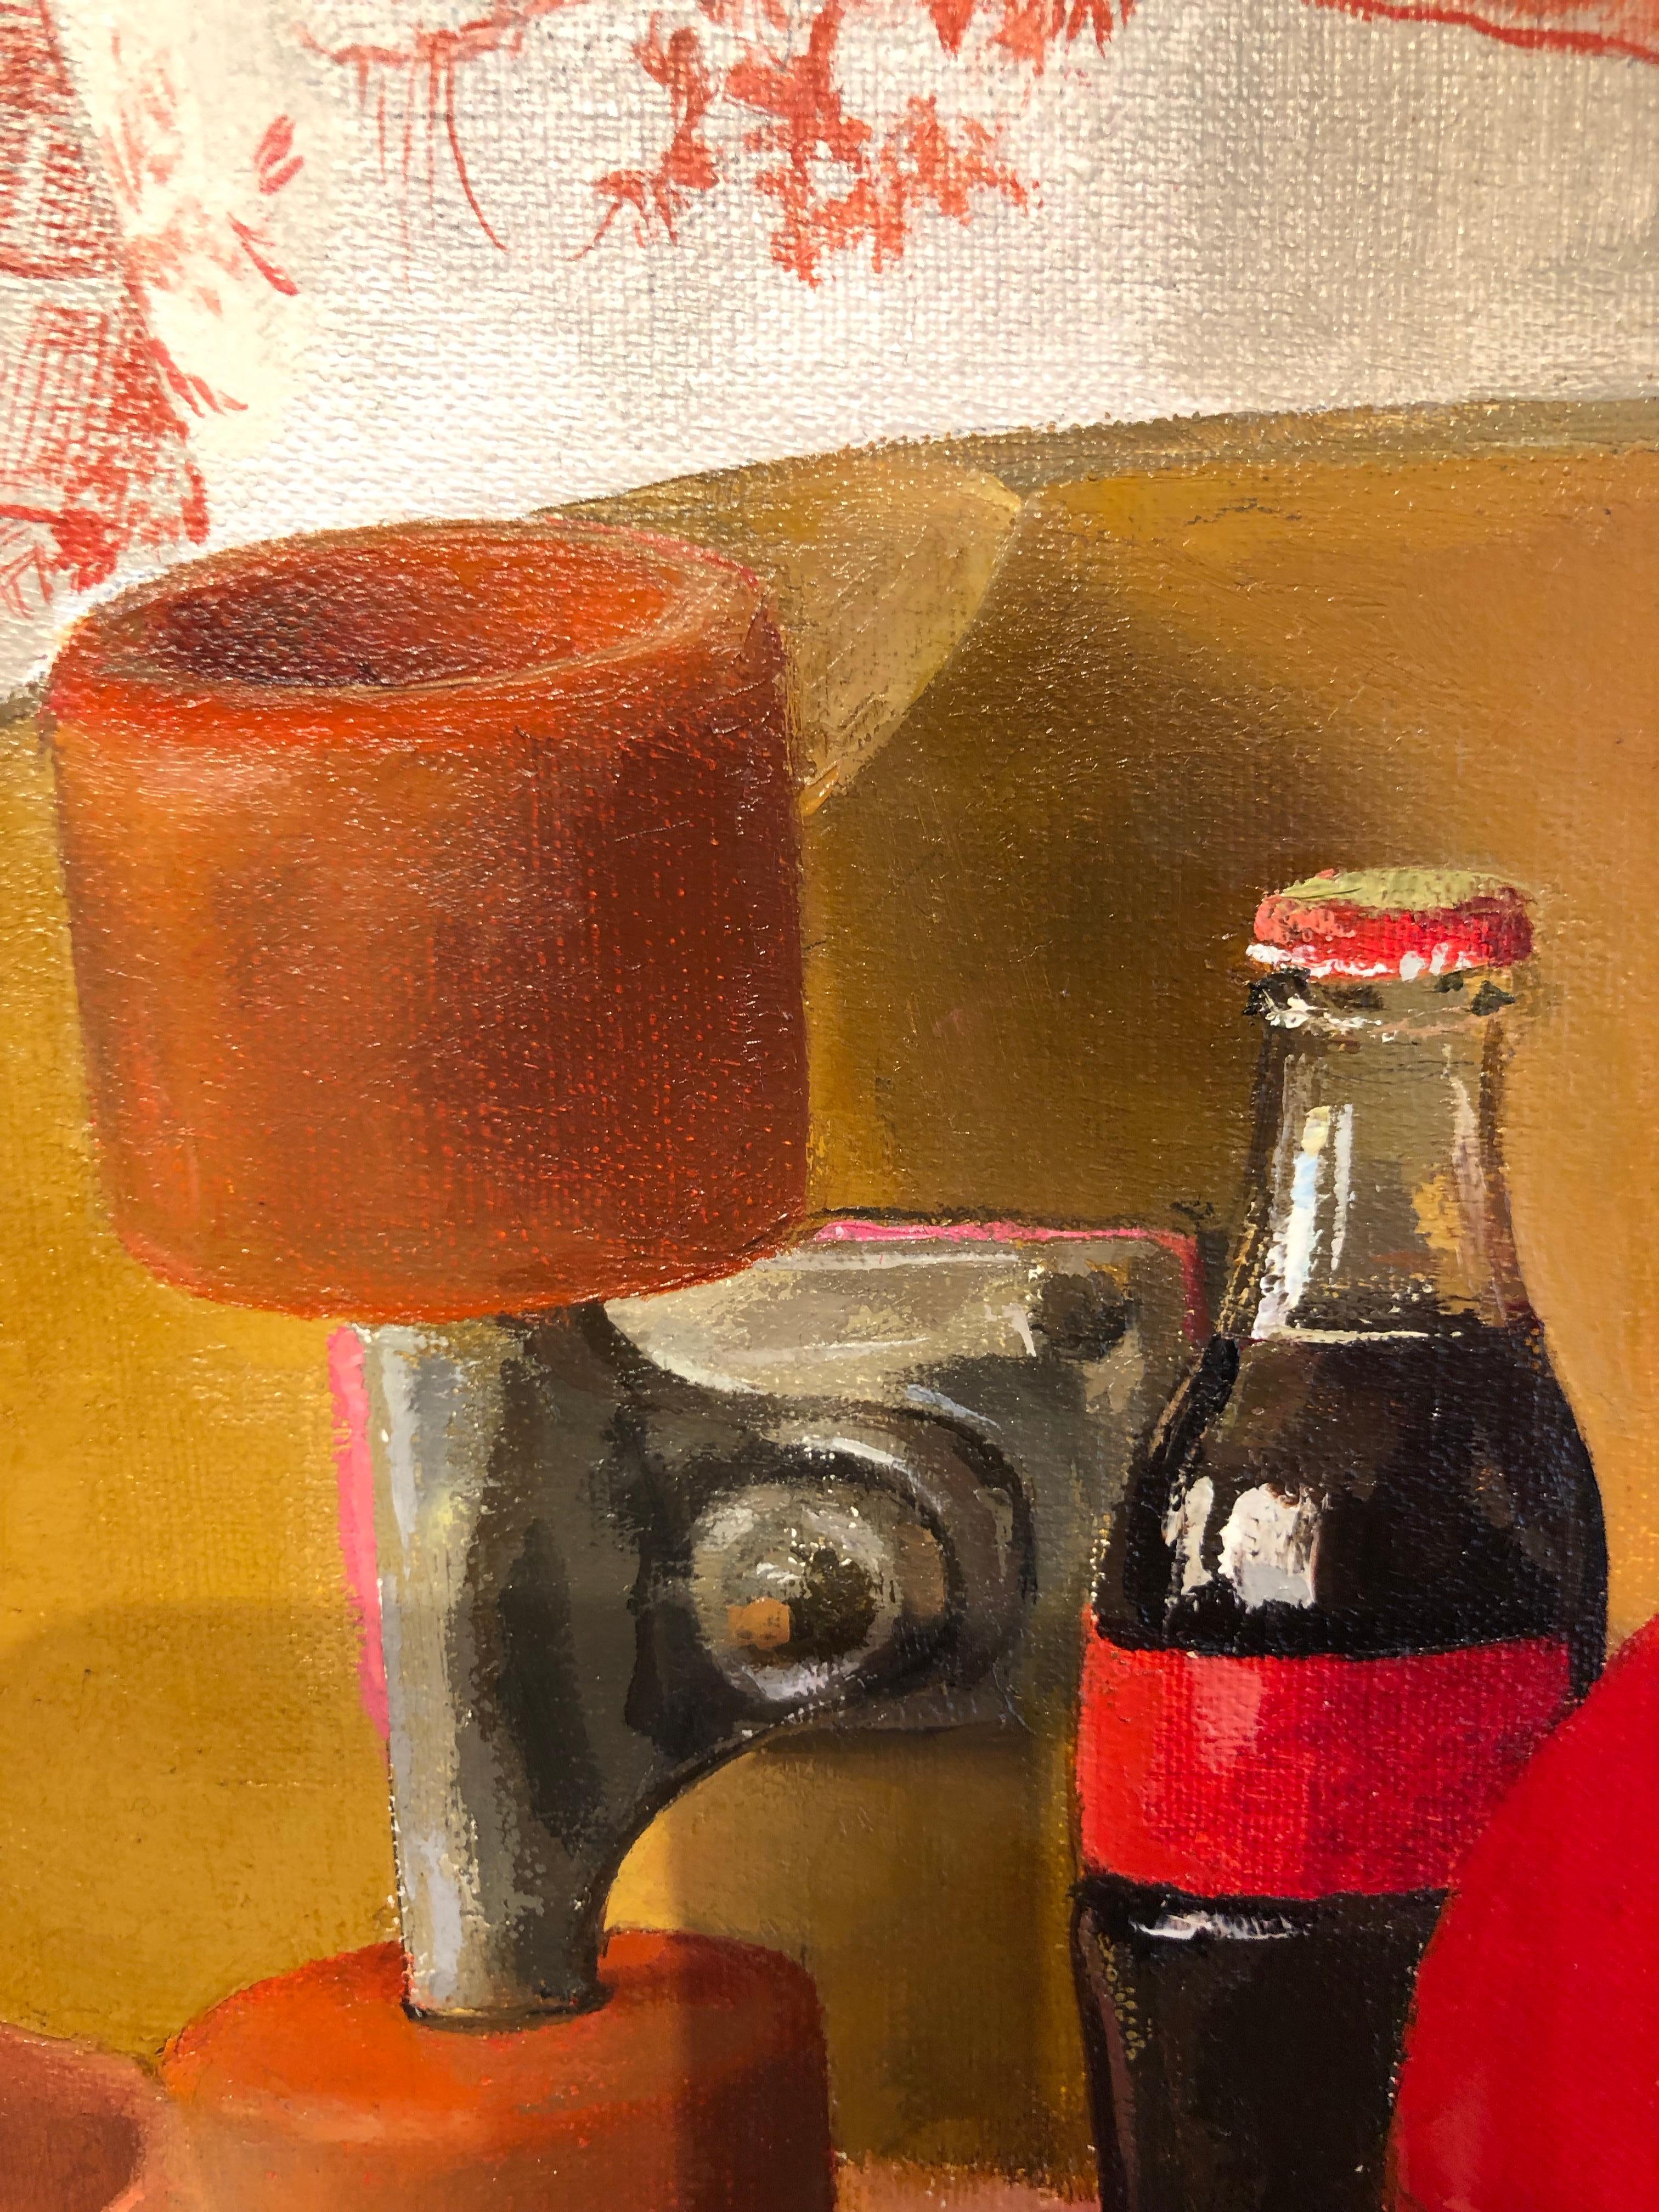 Square Red Still Life - Original Oil Painting with Skateboard and Mixed Objects 5